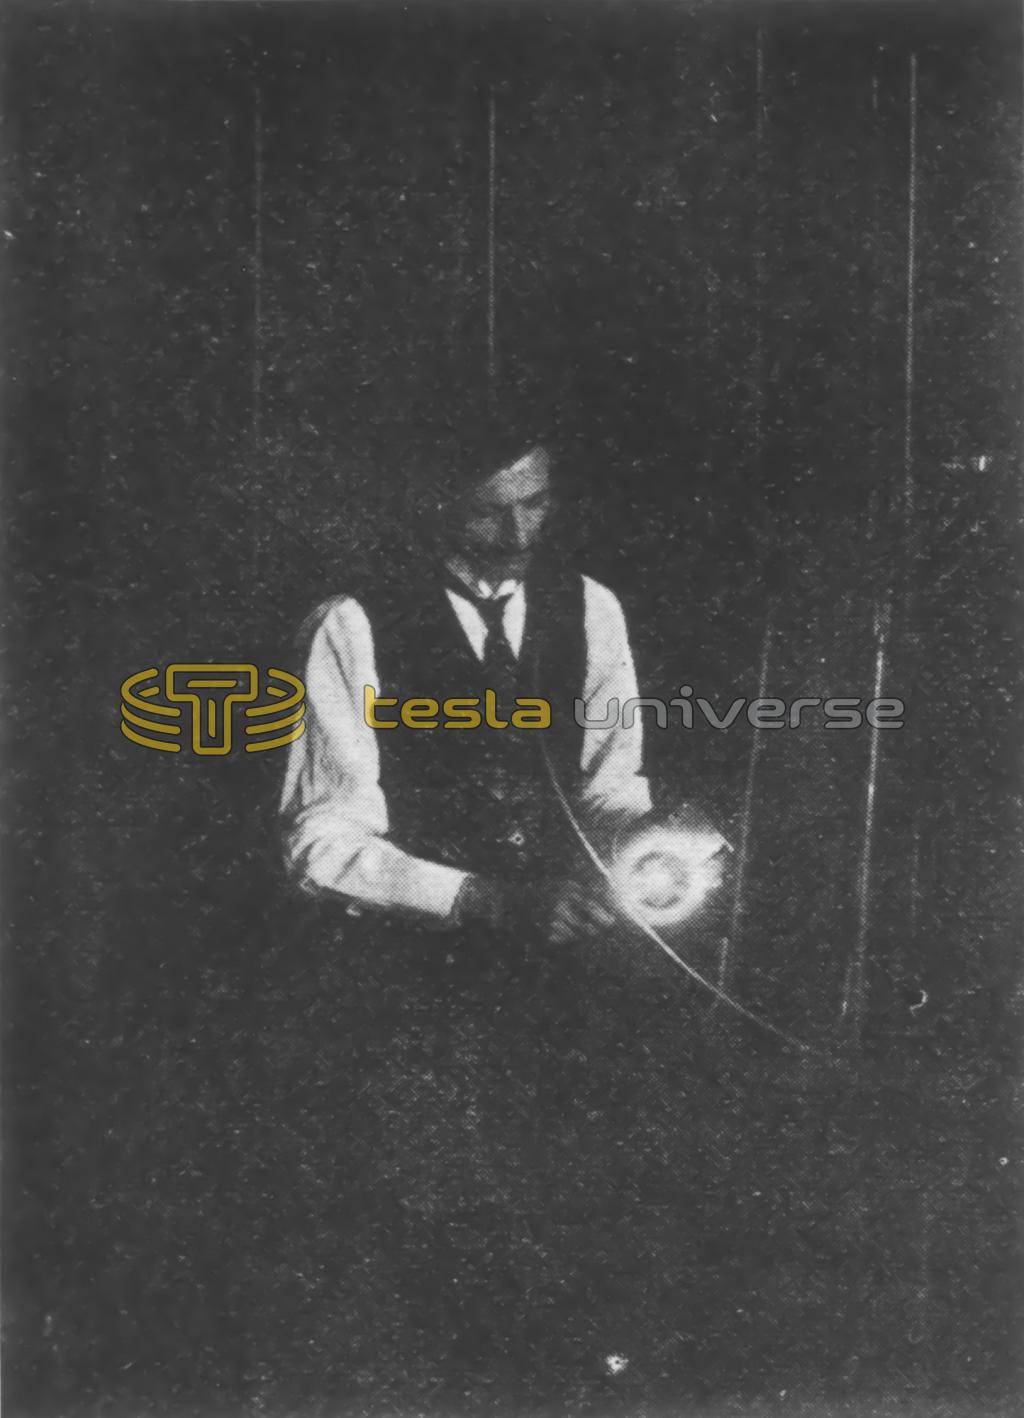 Nikola Tesla showing an incandescent lamp lighted by a synchronized circuit